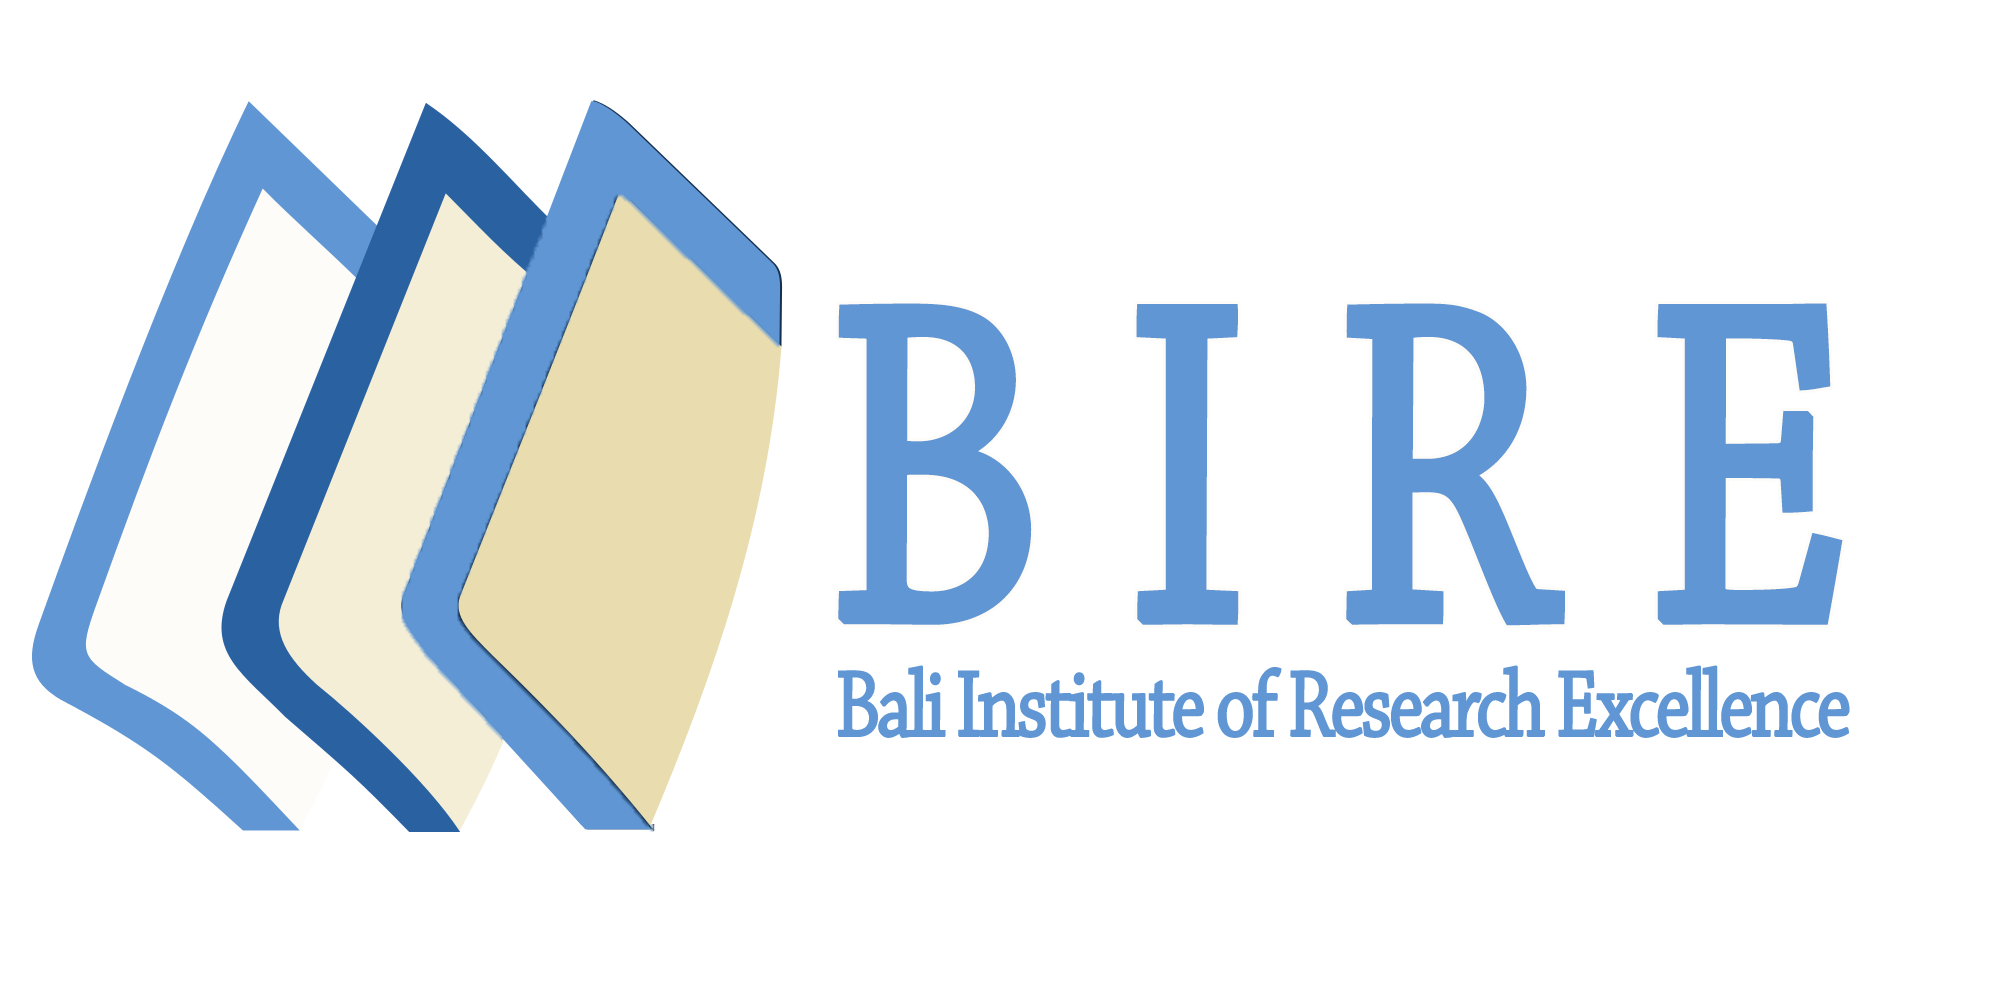 EBMS-2023 3rd International Conference on Research Perspectives on Entrepreneurship Education, Business Management and Social Sciences (EBMS), Bali, Indonesia